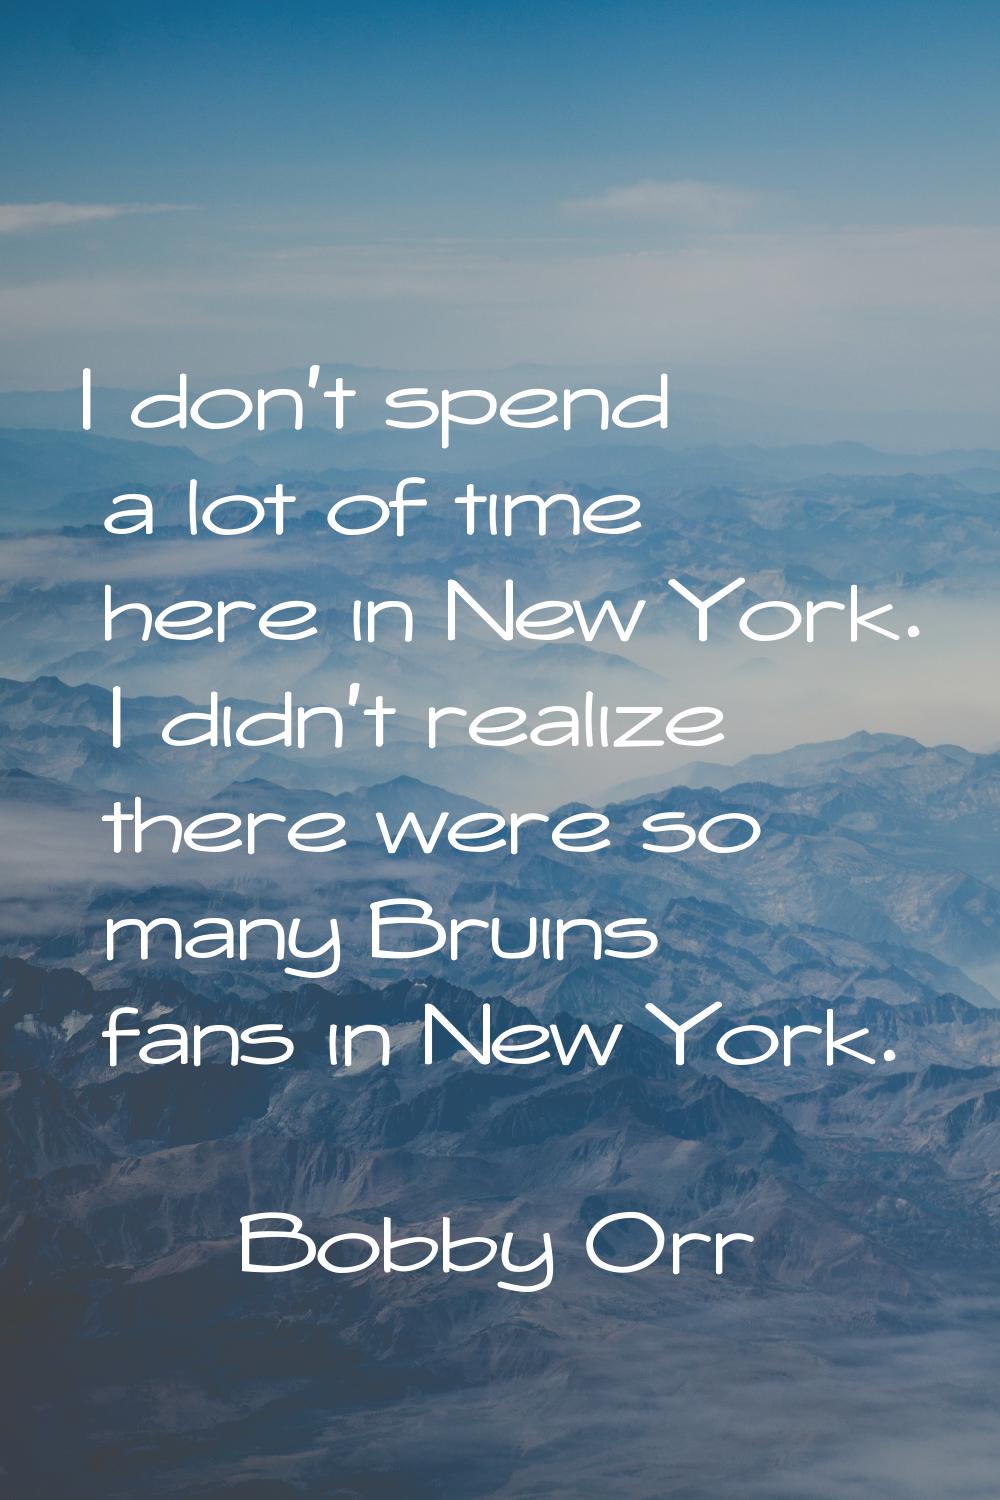 I don't spend a lot of time here in New York. I didn't realize there were so many Bruins fans in Ne